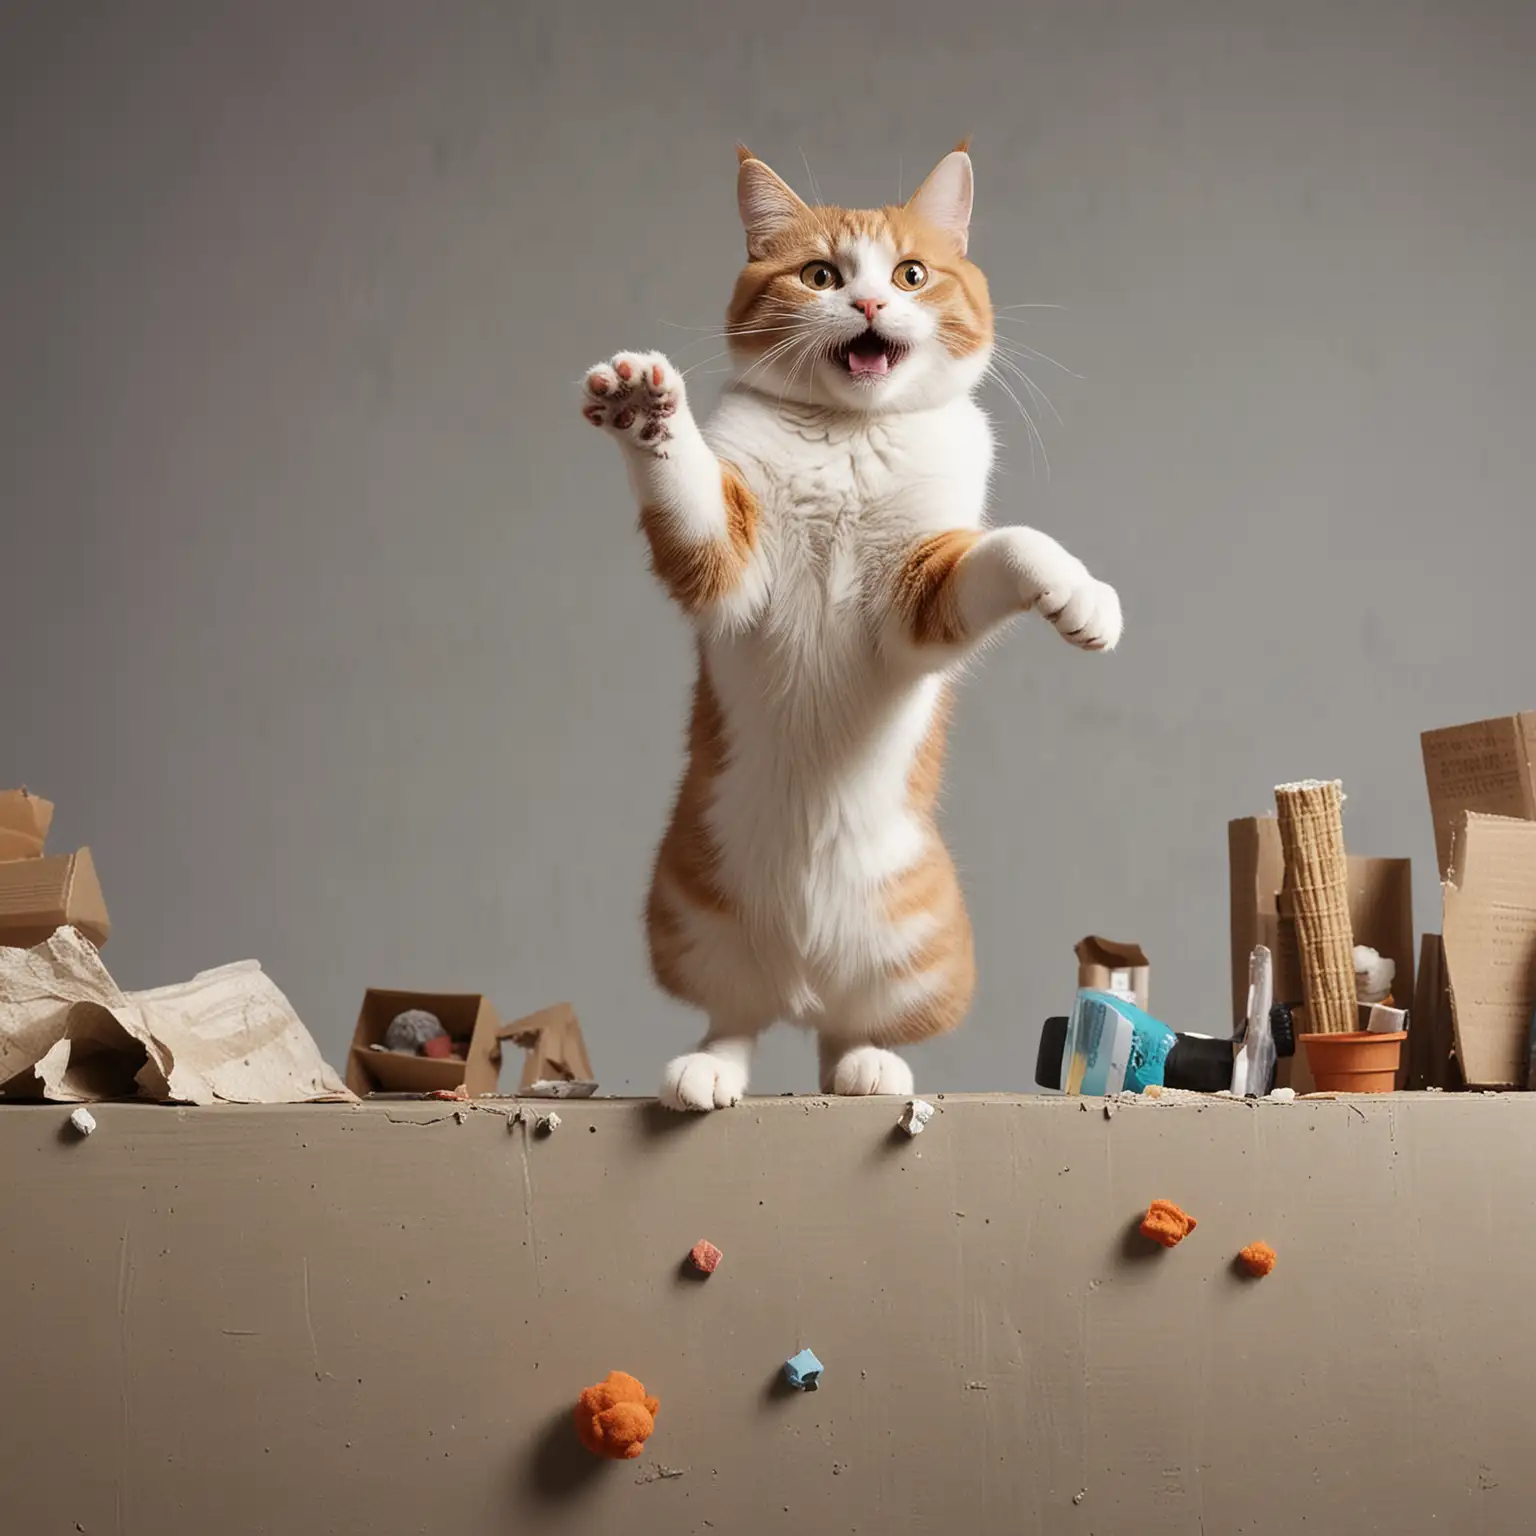 Amusing Cat Fail Hilarious Moment of Feline Misadventure Captured in Realistic Photography